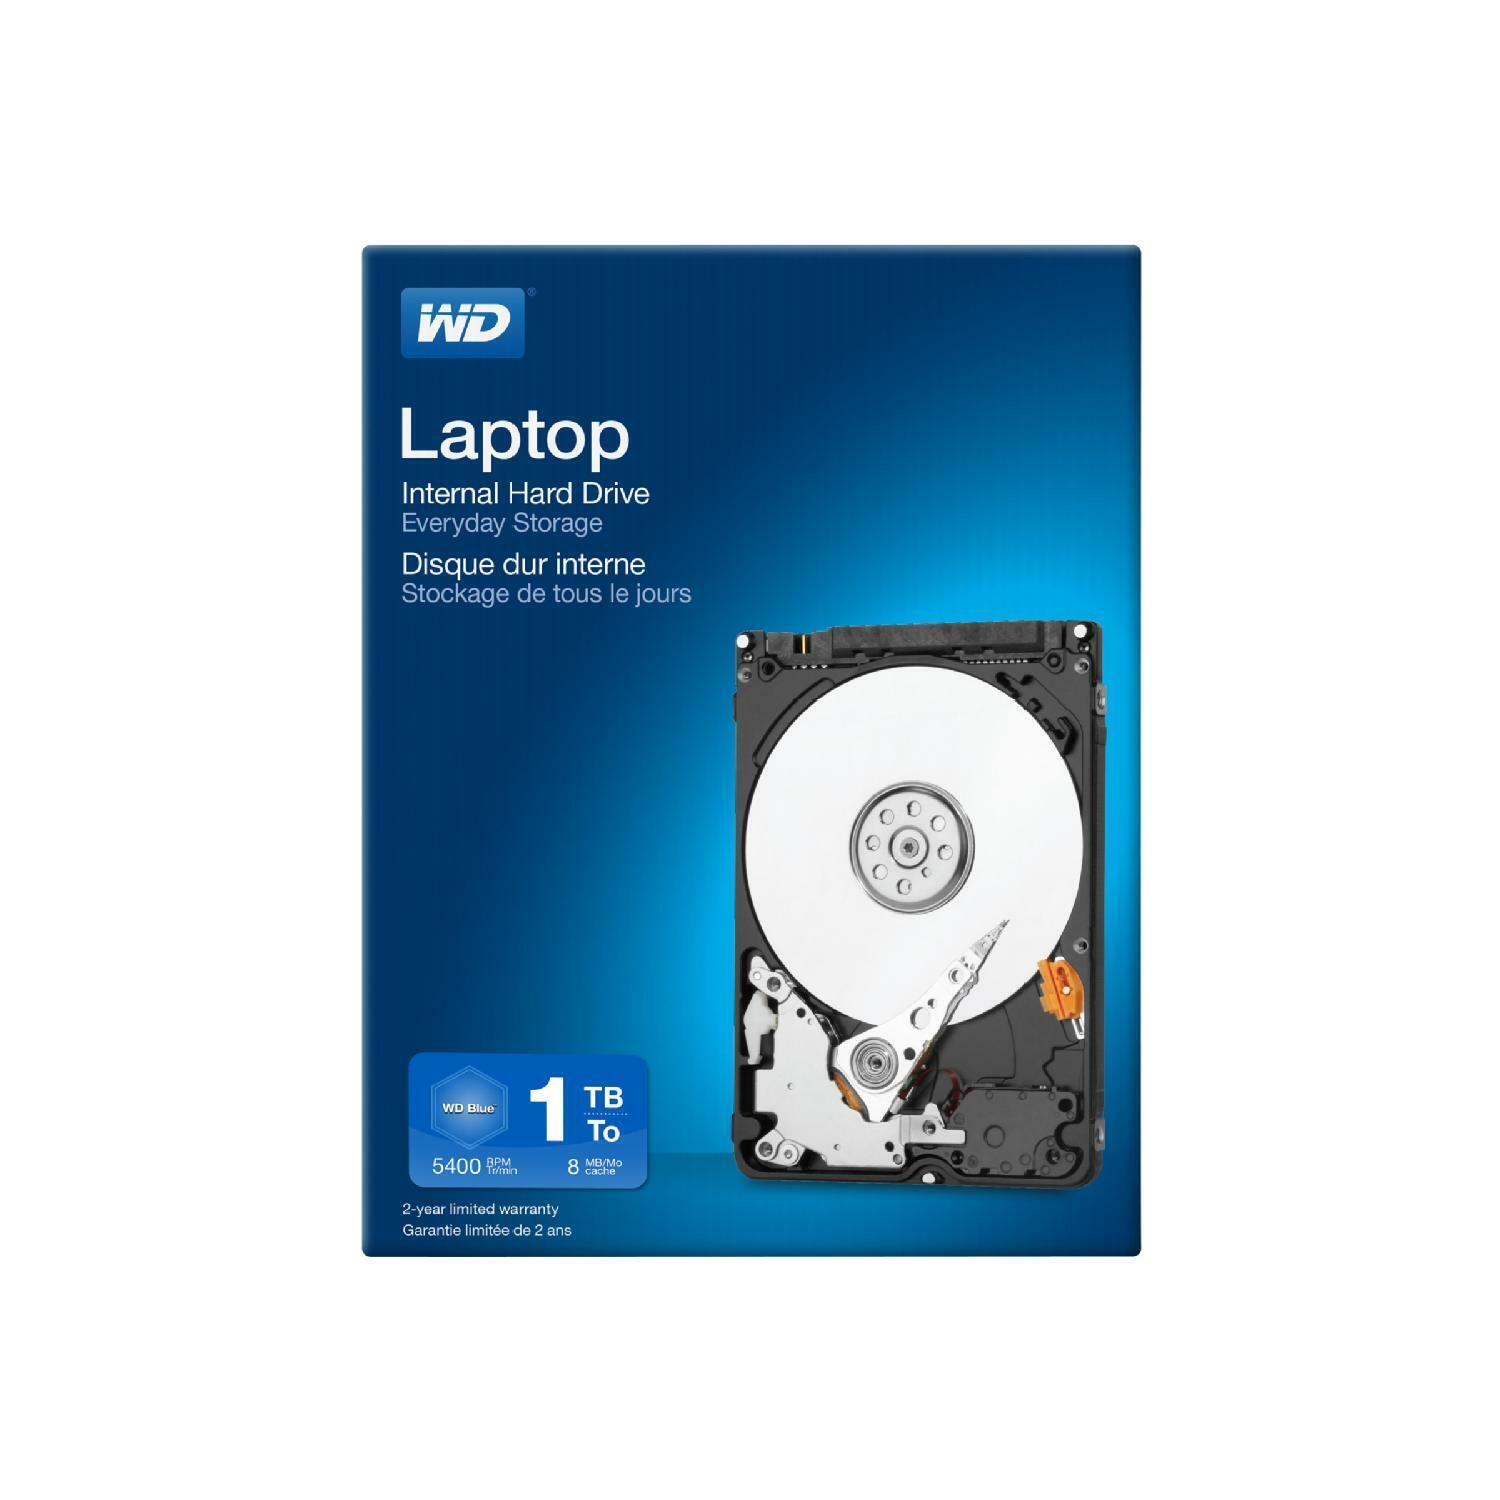 NEW 1TB Hard Drive - Windows 10 Pro 64 Bit Loaded for Dell Inspiron 1764 Laptop